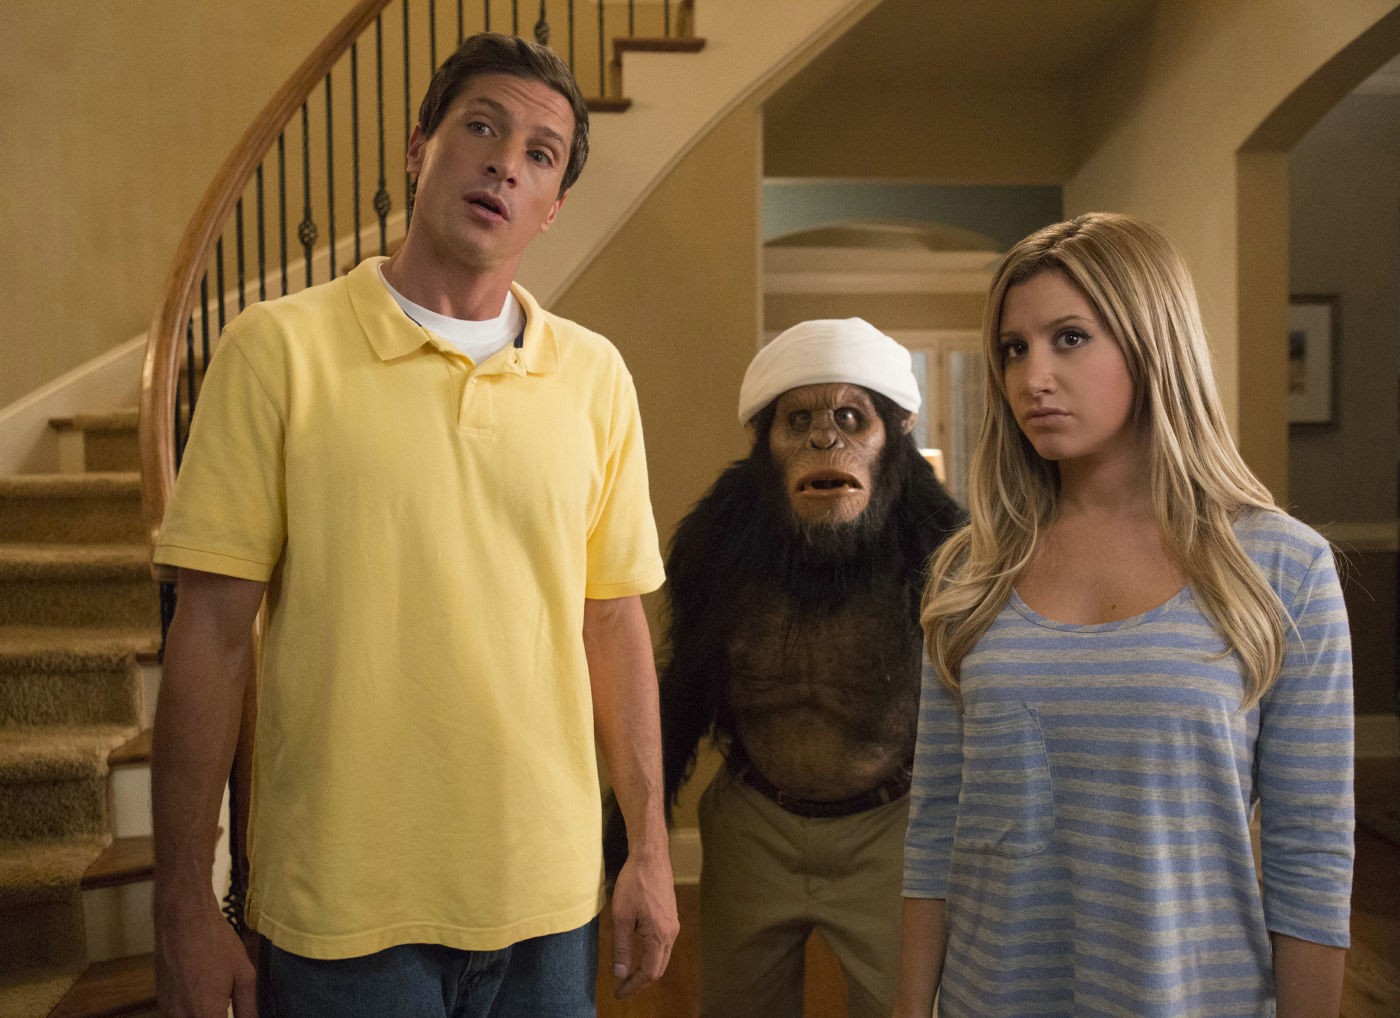 Simon Rex stars as Dan and Ashley Tisdale stars as Jody Campbell in Dimension Films' Scary Movie 5 (2013)